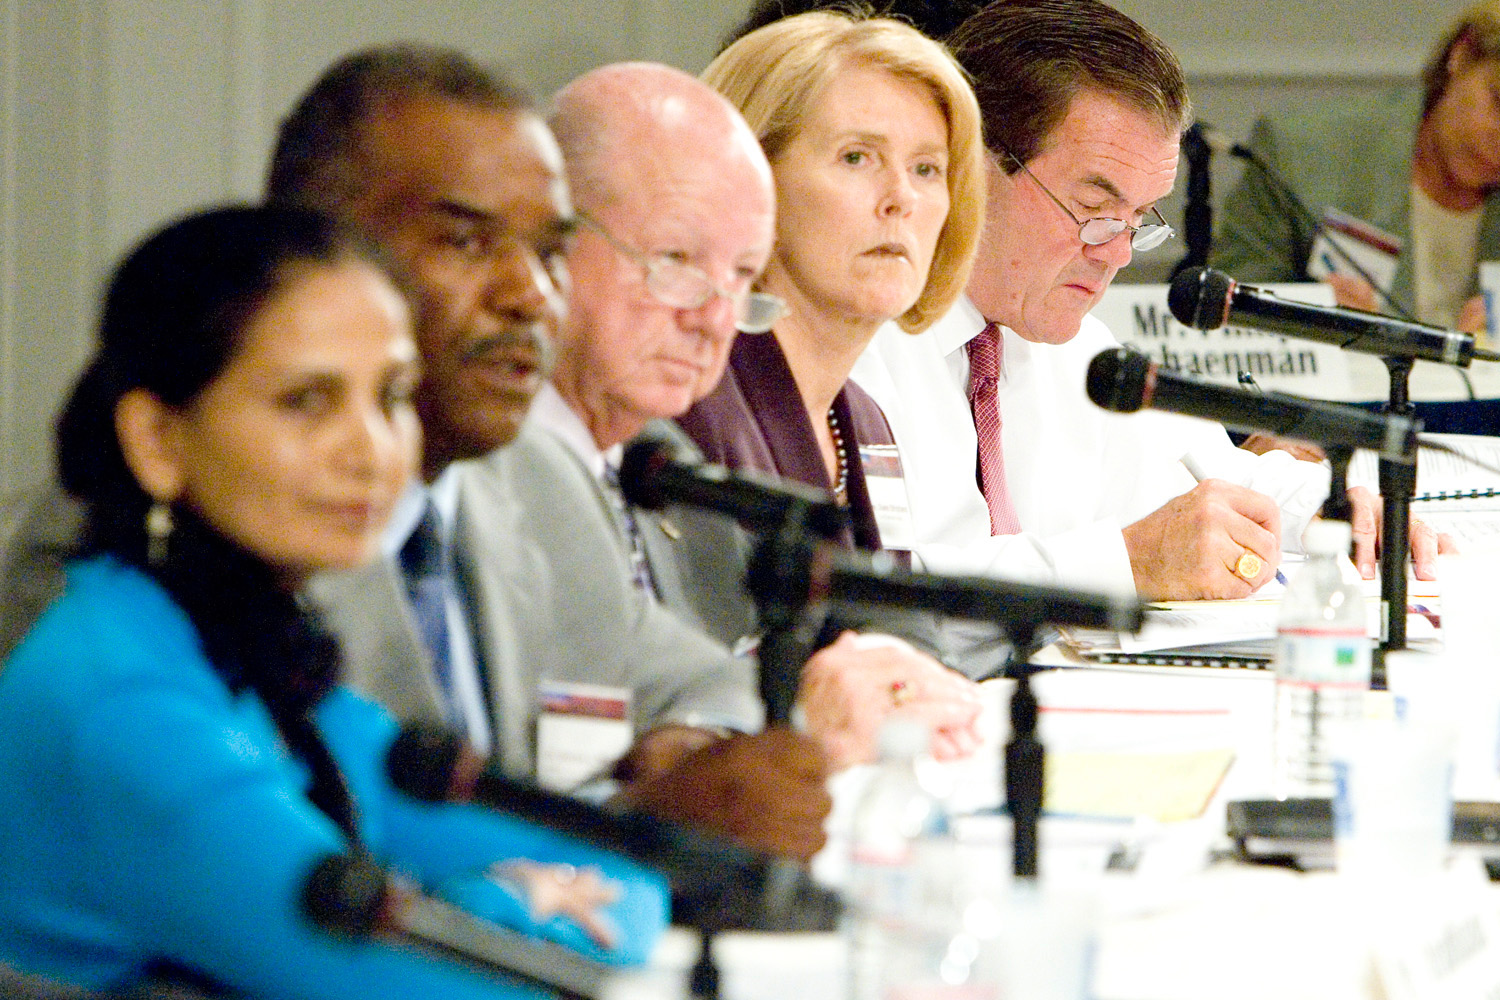 Review panel sitting at microphones listening to testimony